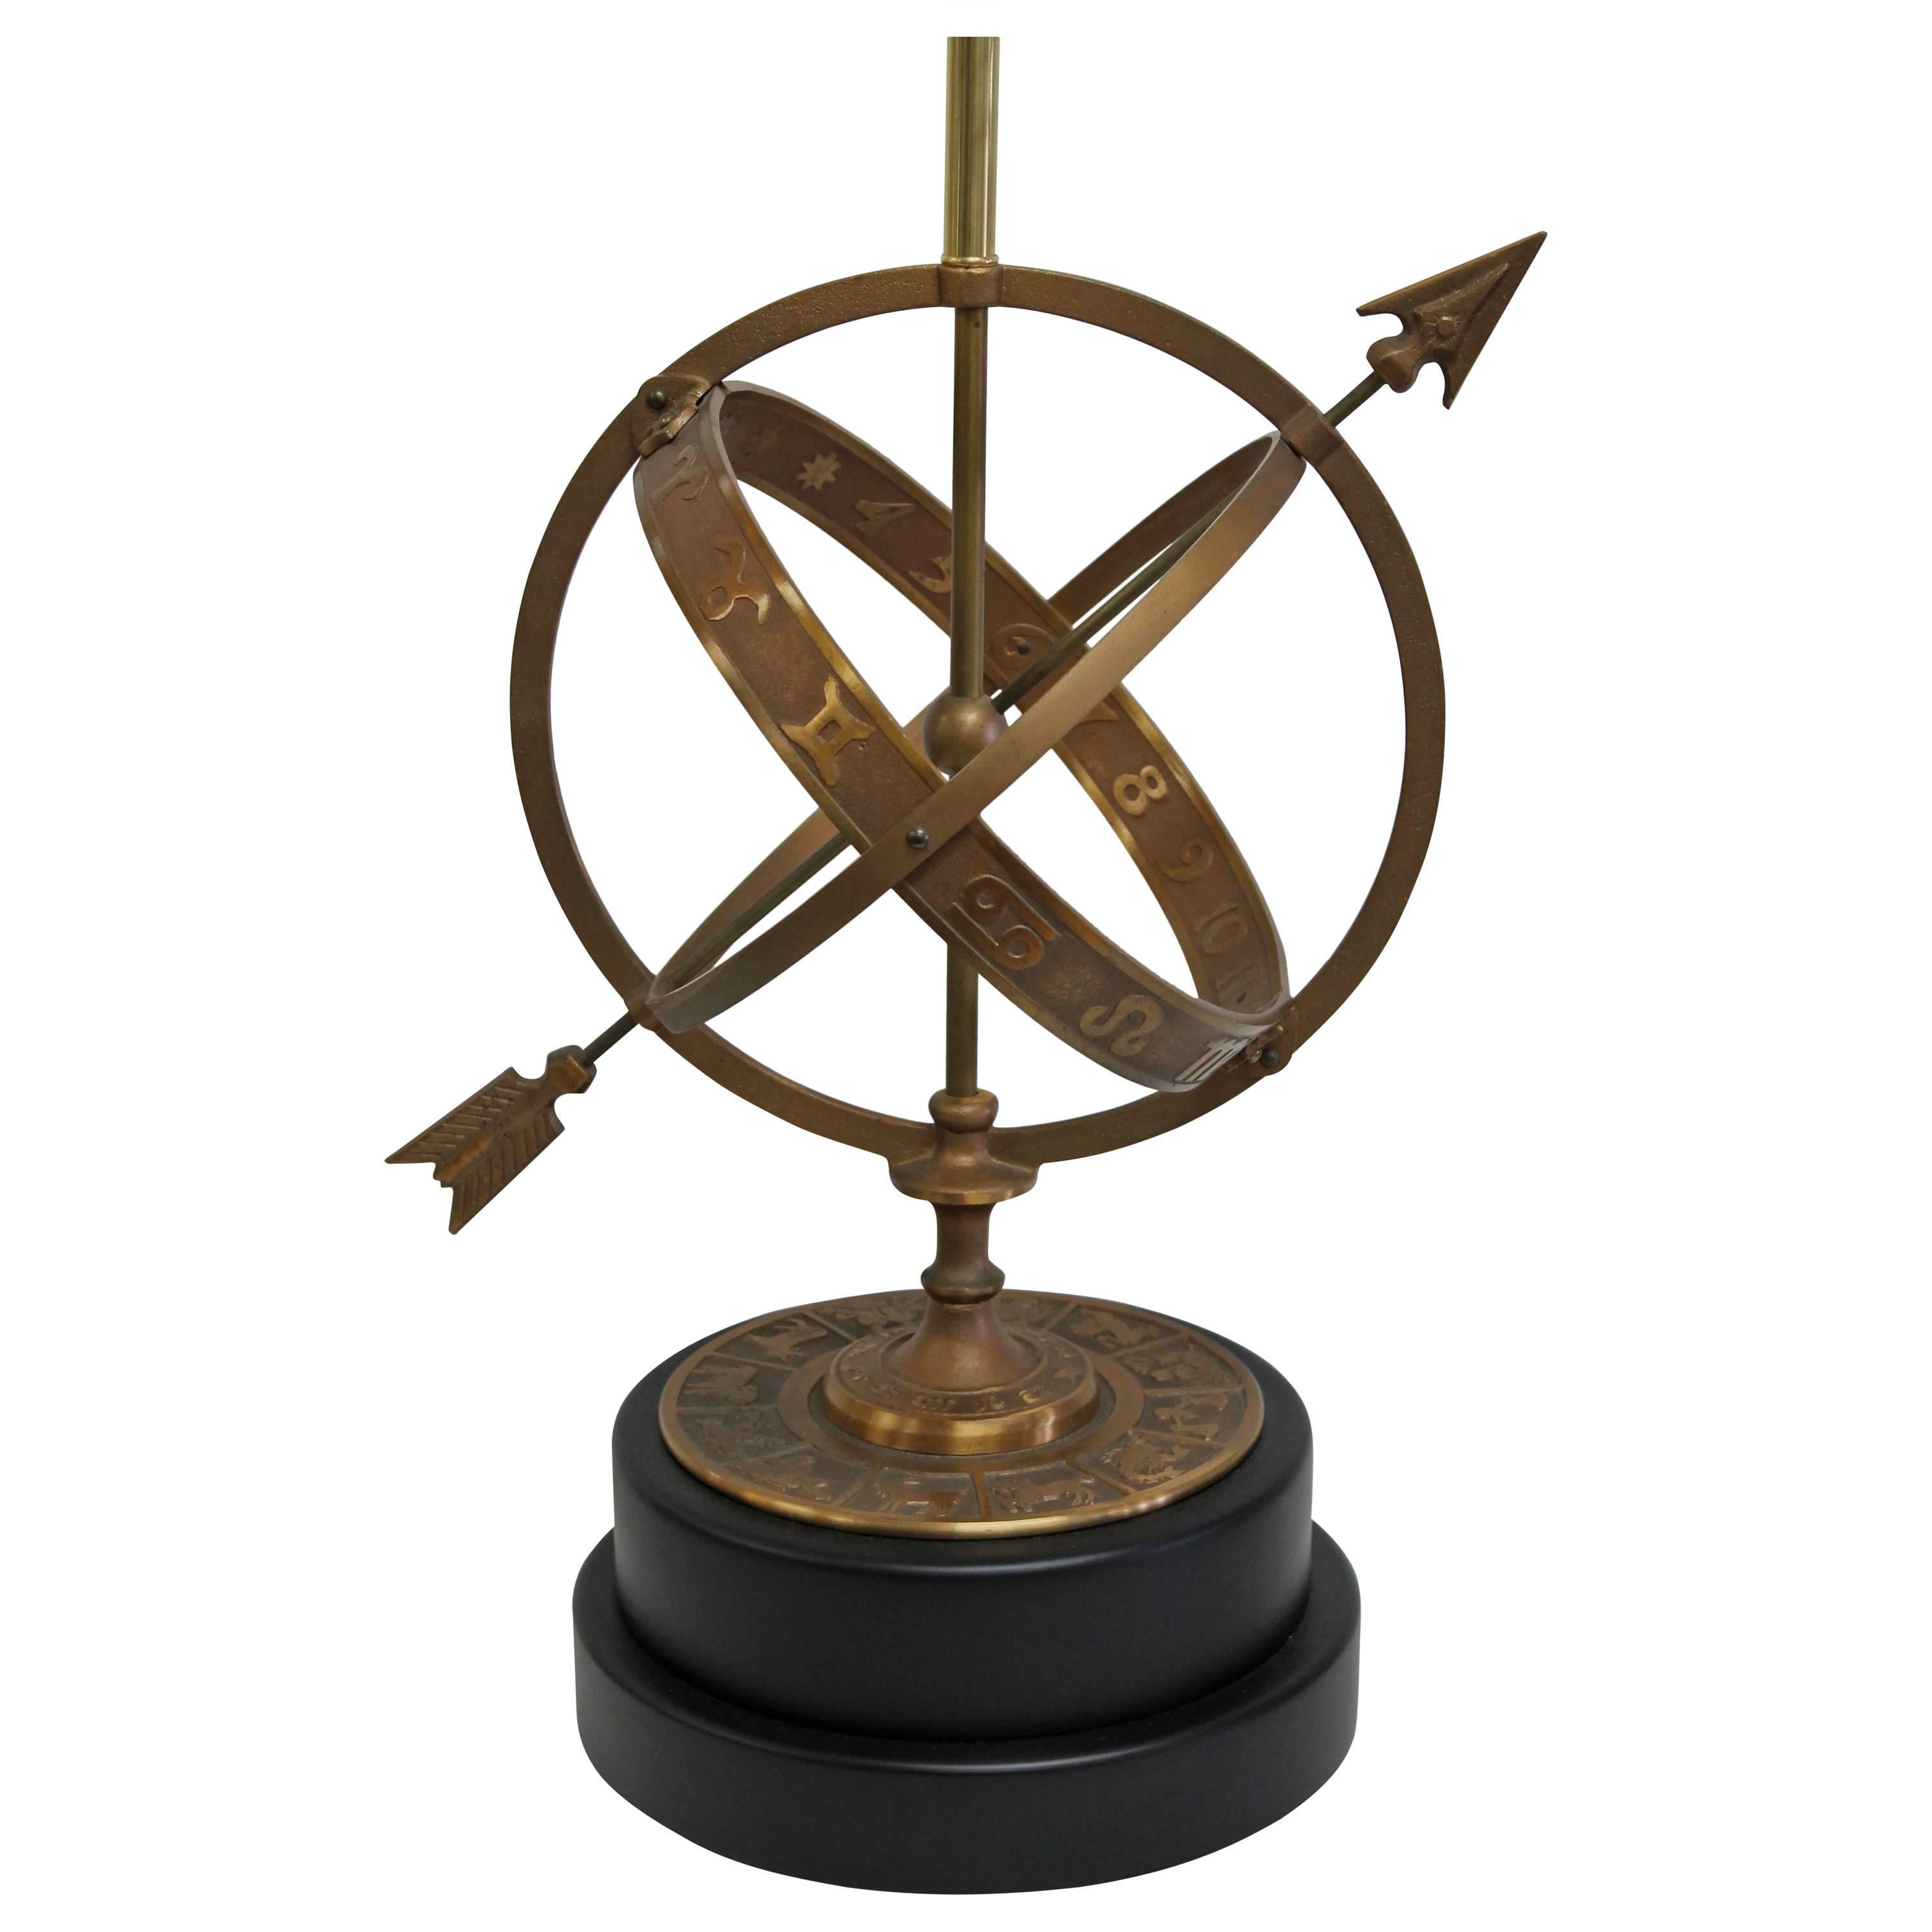 Bronze Astrological Armillary Table Lamp, Frederick Cooper Lamp Co.